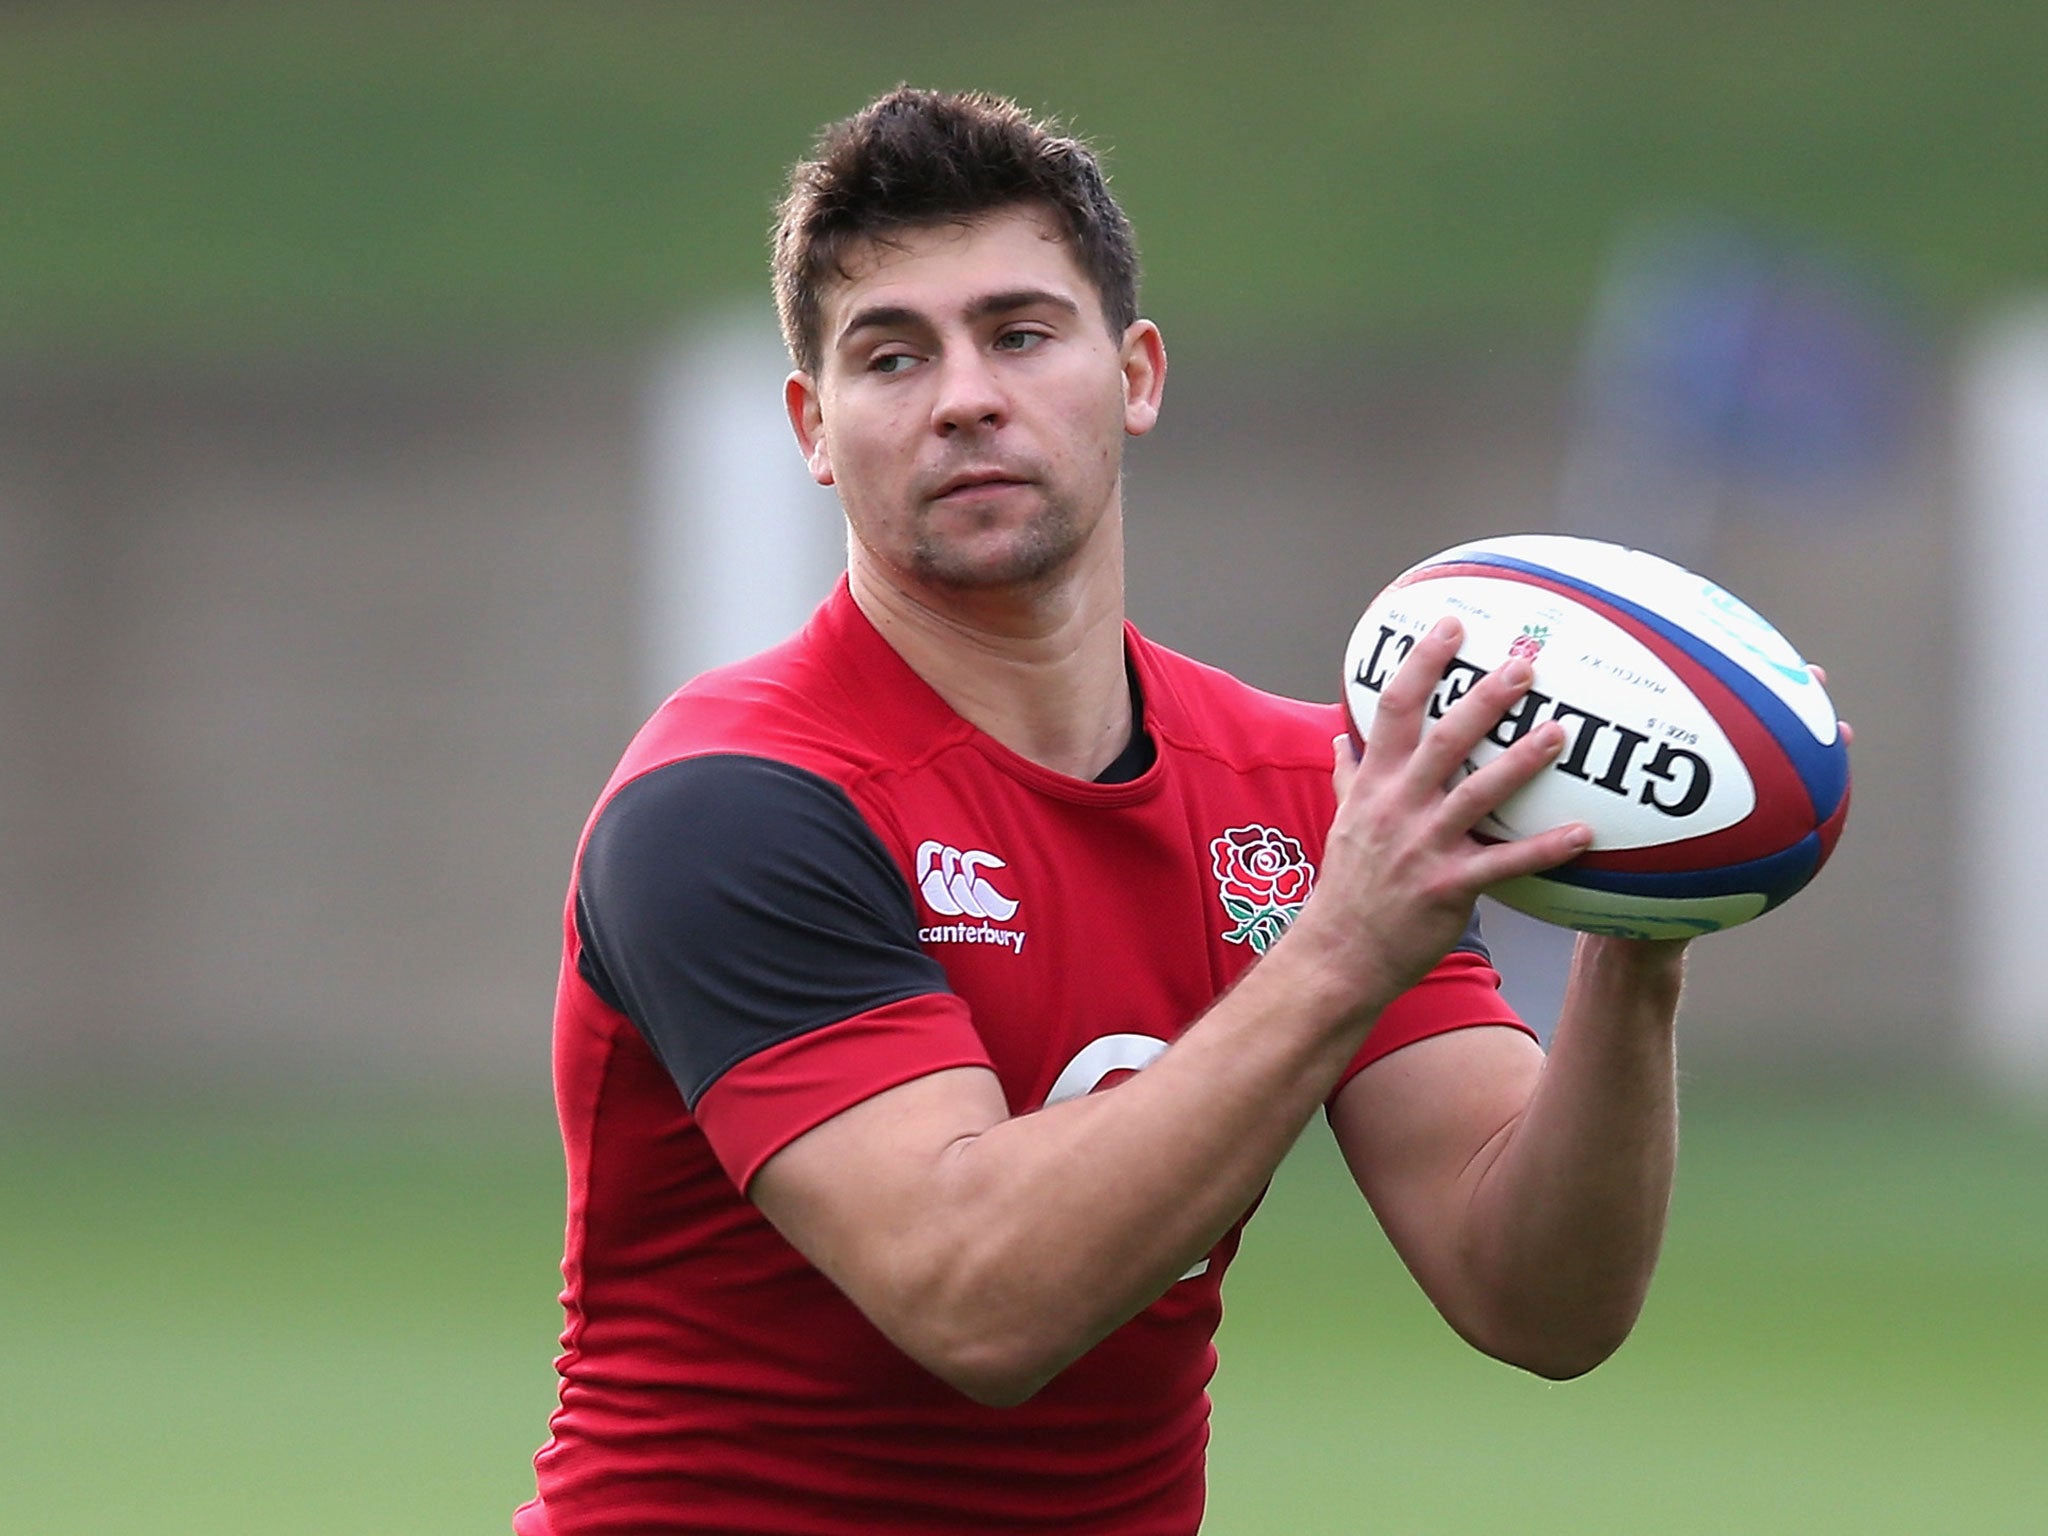 Ben Youngs, made scrum-half ahead of Danny Care, is up against one of the game’s premium No 9s